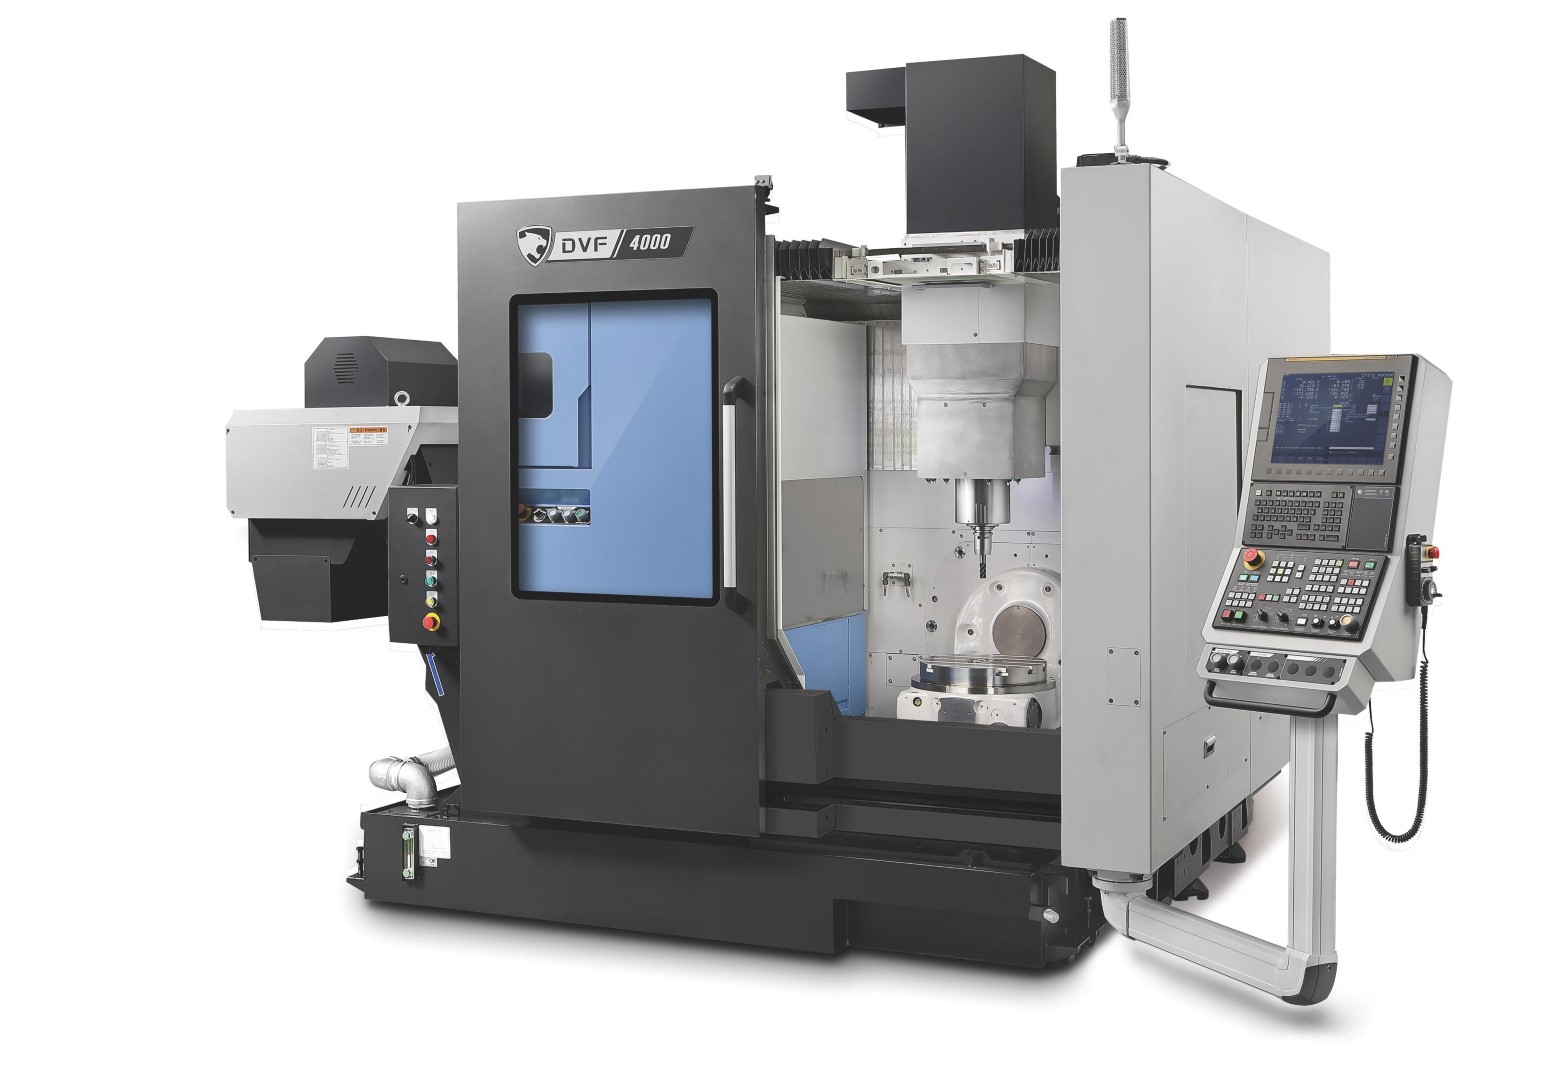 NEW 5-AXIS DVF4000 DN SOLUTIONS